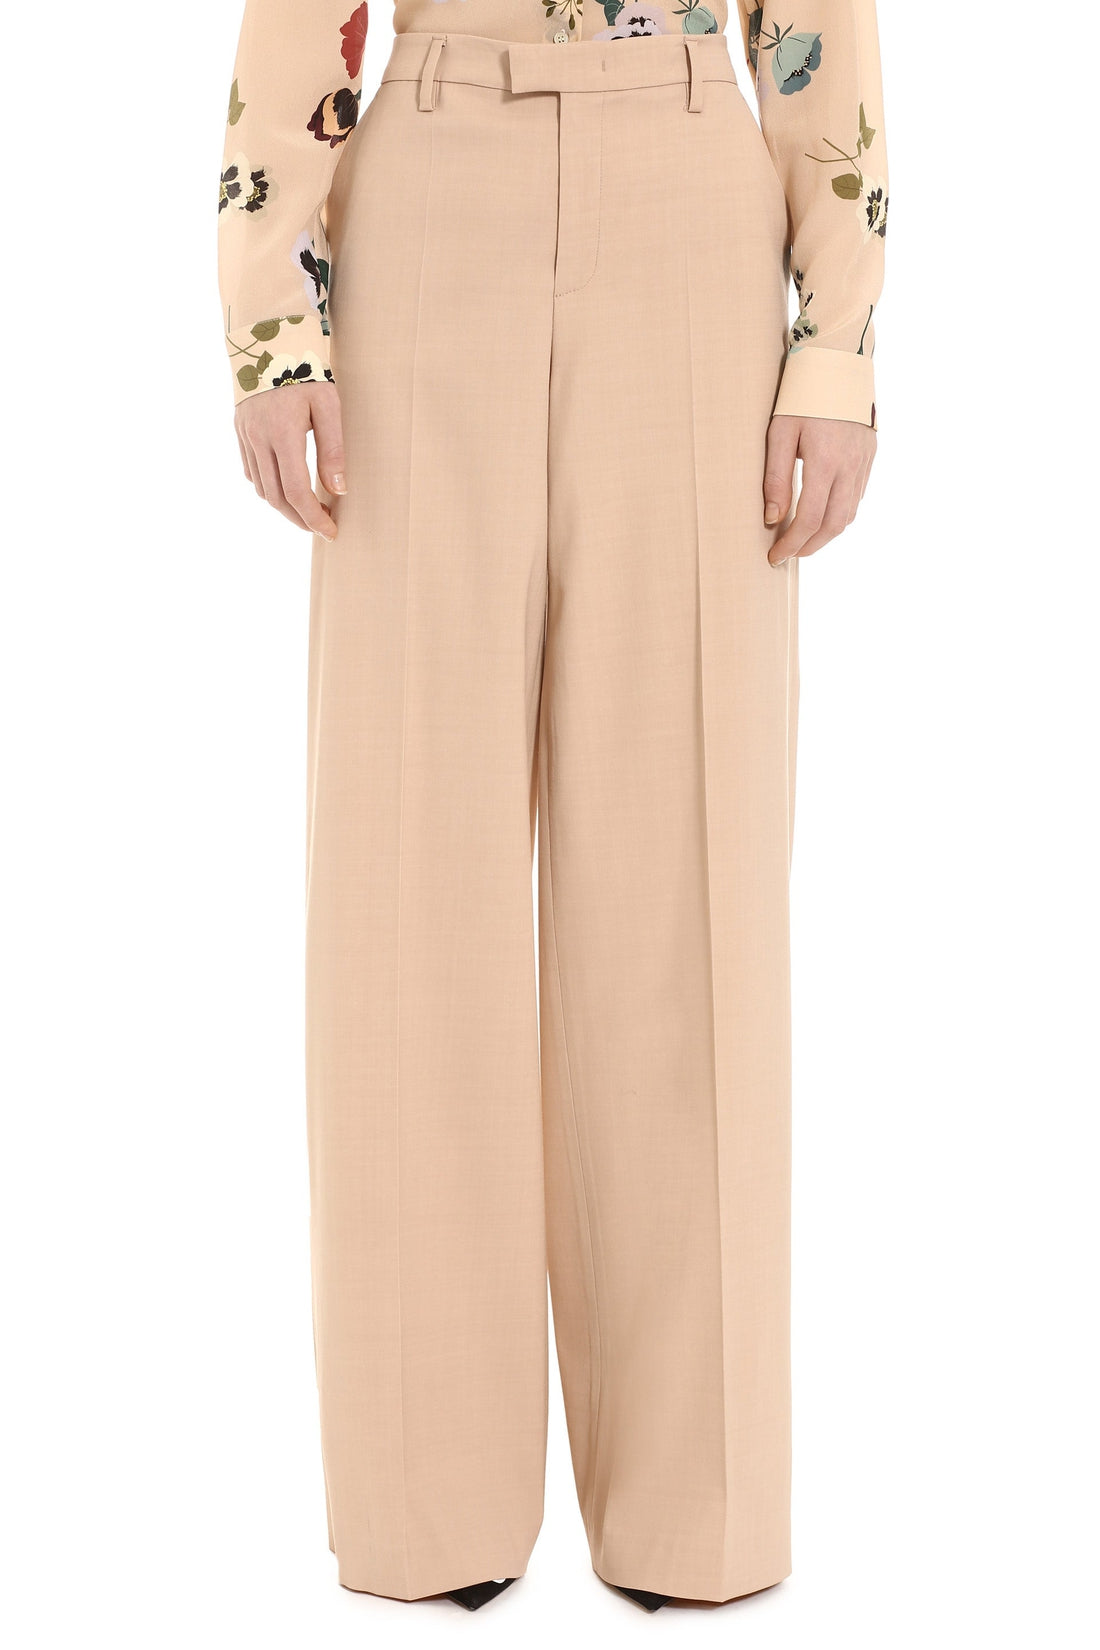 RED VALENTINO-OUTLET-SALE-Wide leg trousers-ARCHIVIST